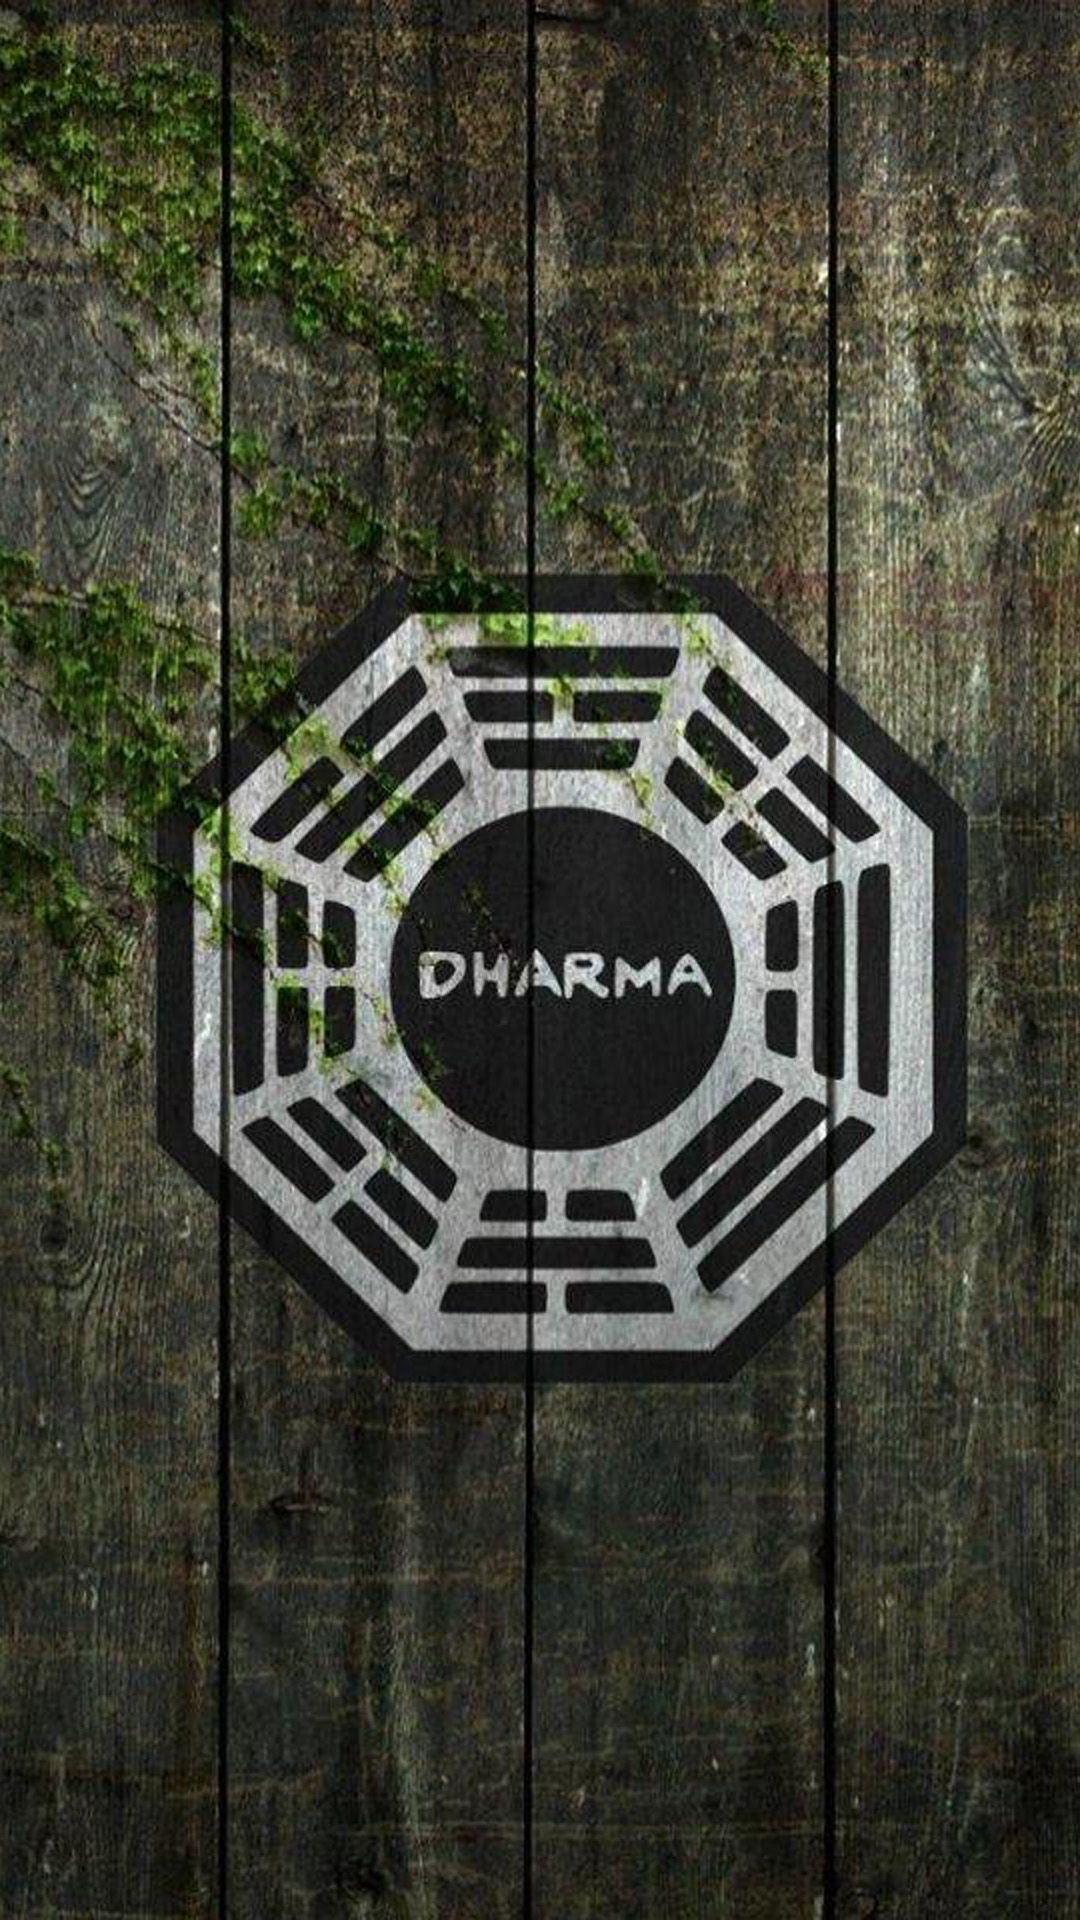 Dharma Initiative - Best htc one wallpapers, free and easy to download